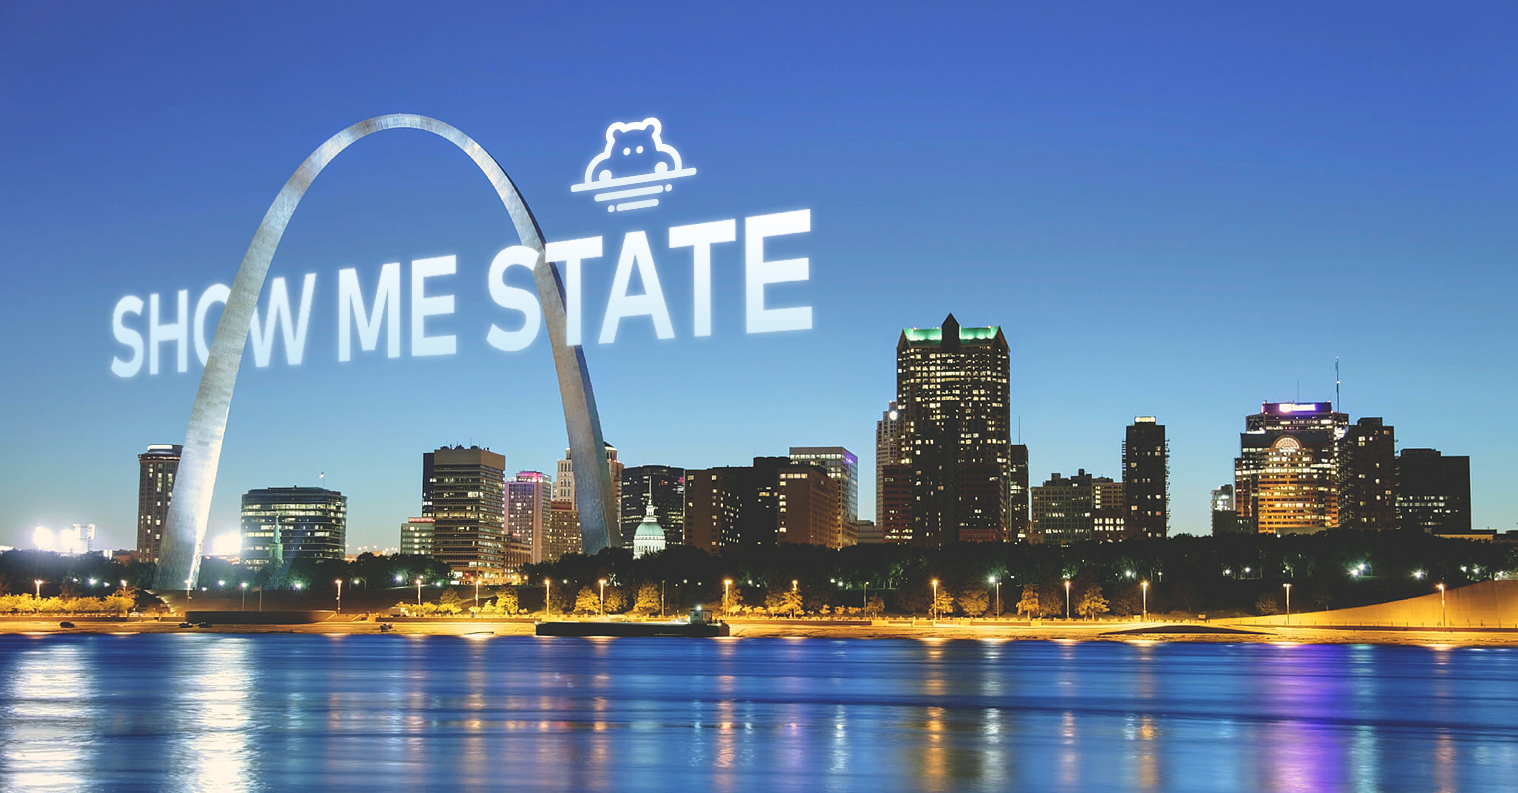 Hippo is now available in the show me state.